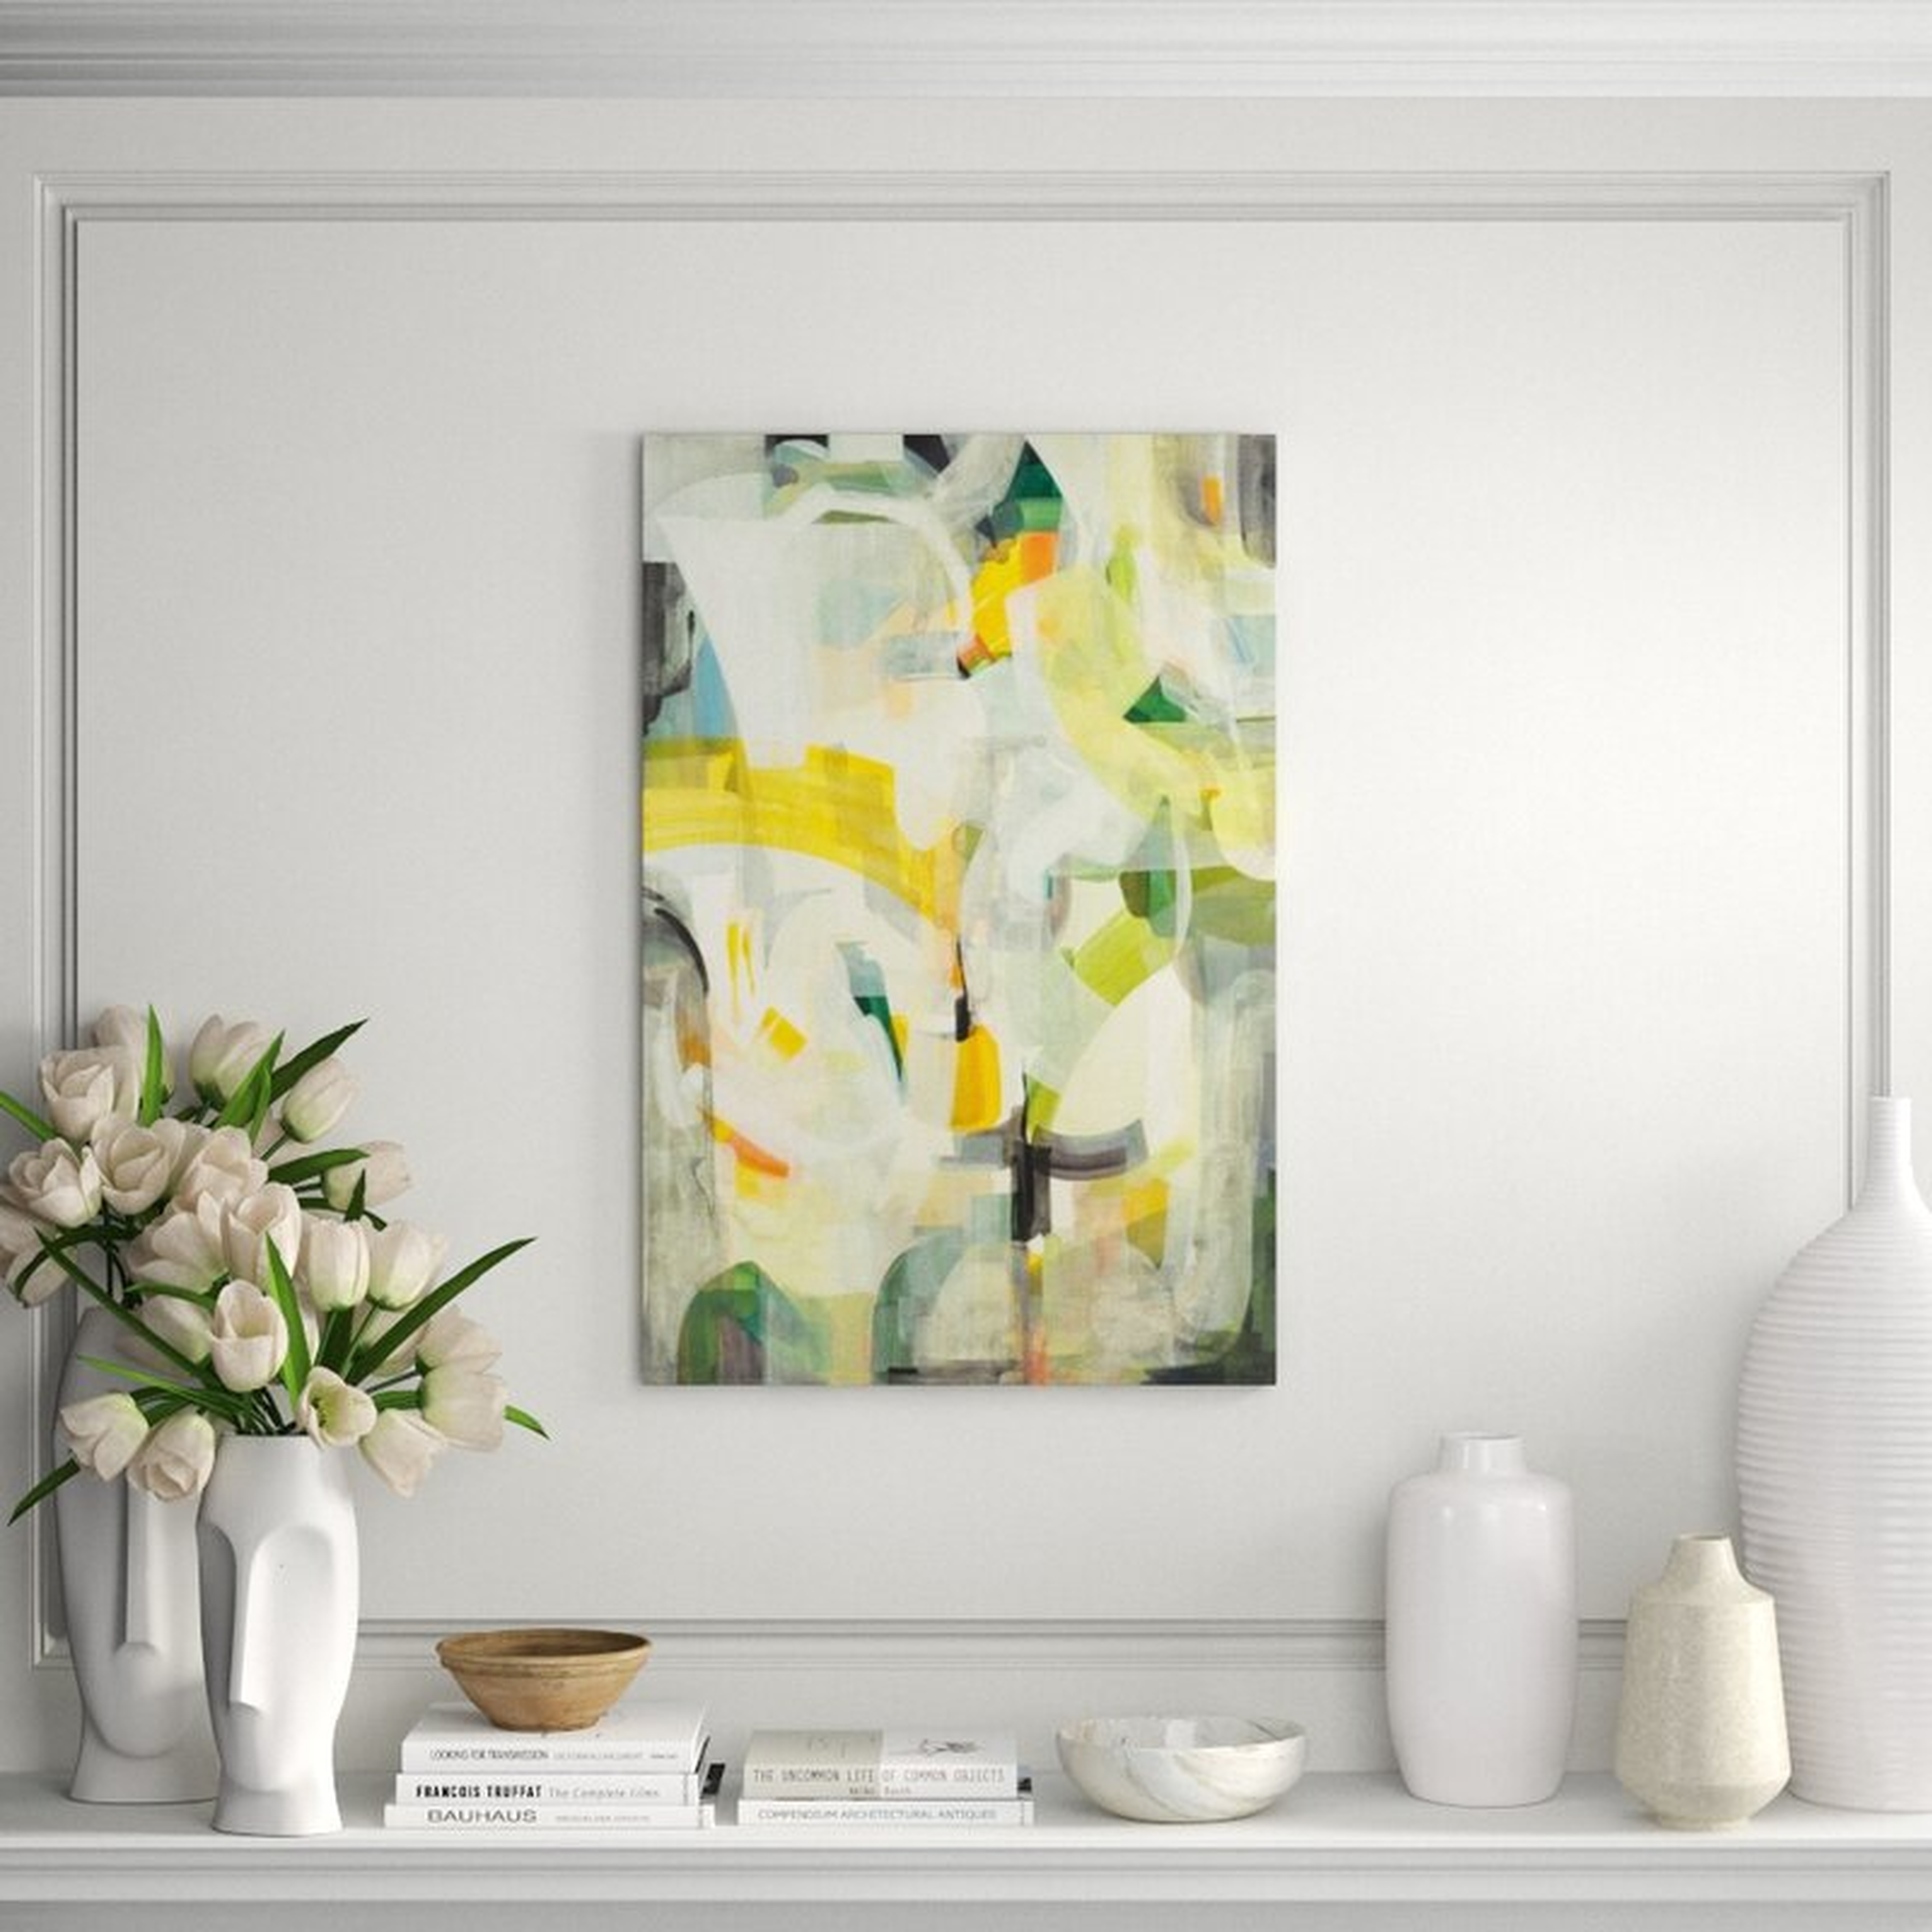 Chelsea Art Studio Green Urban by Sara Brown - Wrapped Canvas Painting - Perigold